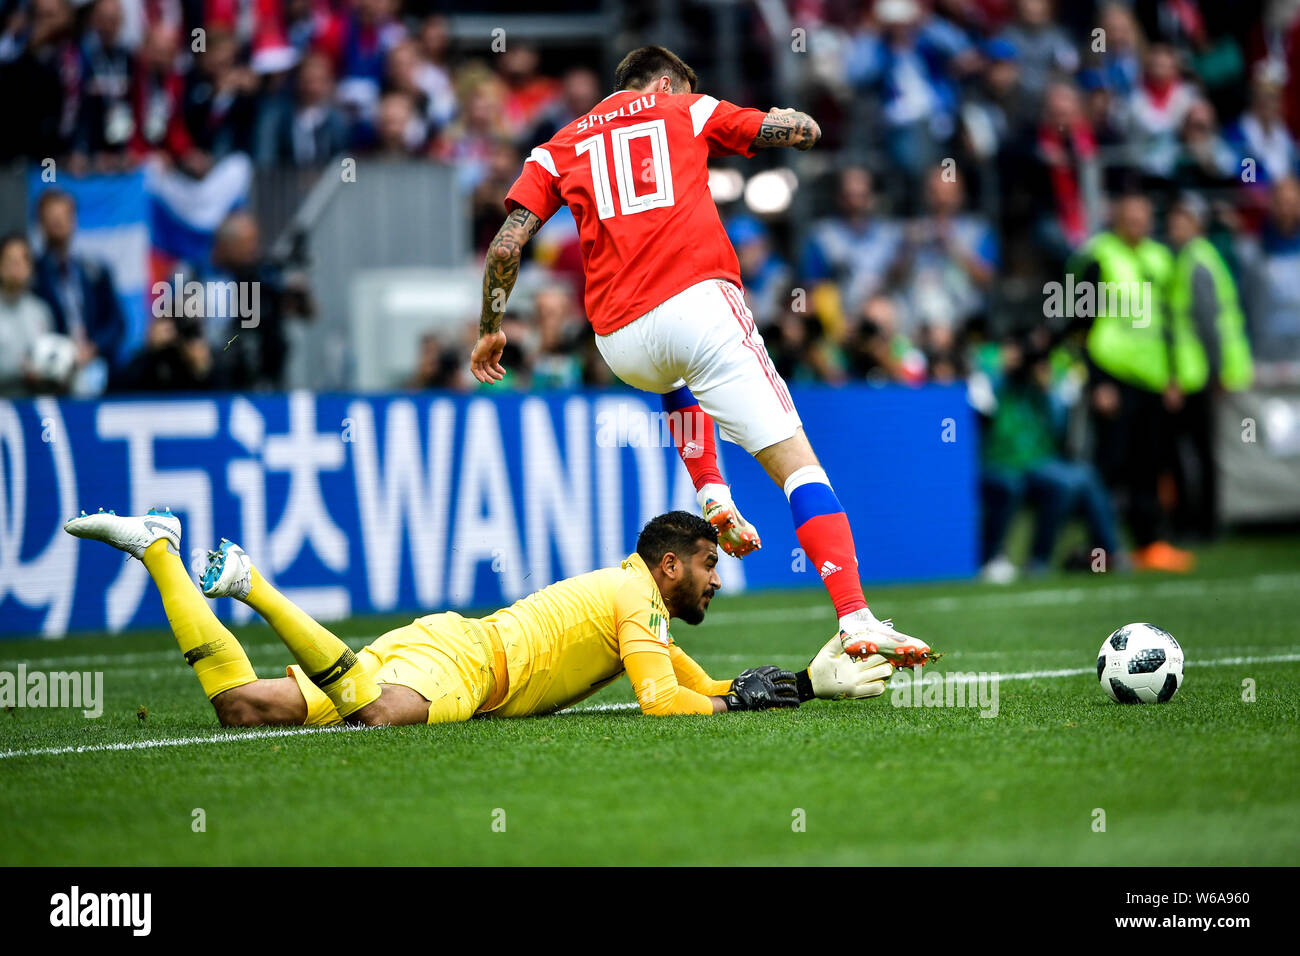 Fyodor Smolov of Russia, right, challenges Abdullah Al-Mayouf of Saudi Arabia in their Group A match during the 2018 FIFA World Cup in Moscow, Russia, Stock Photo